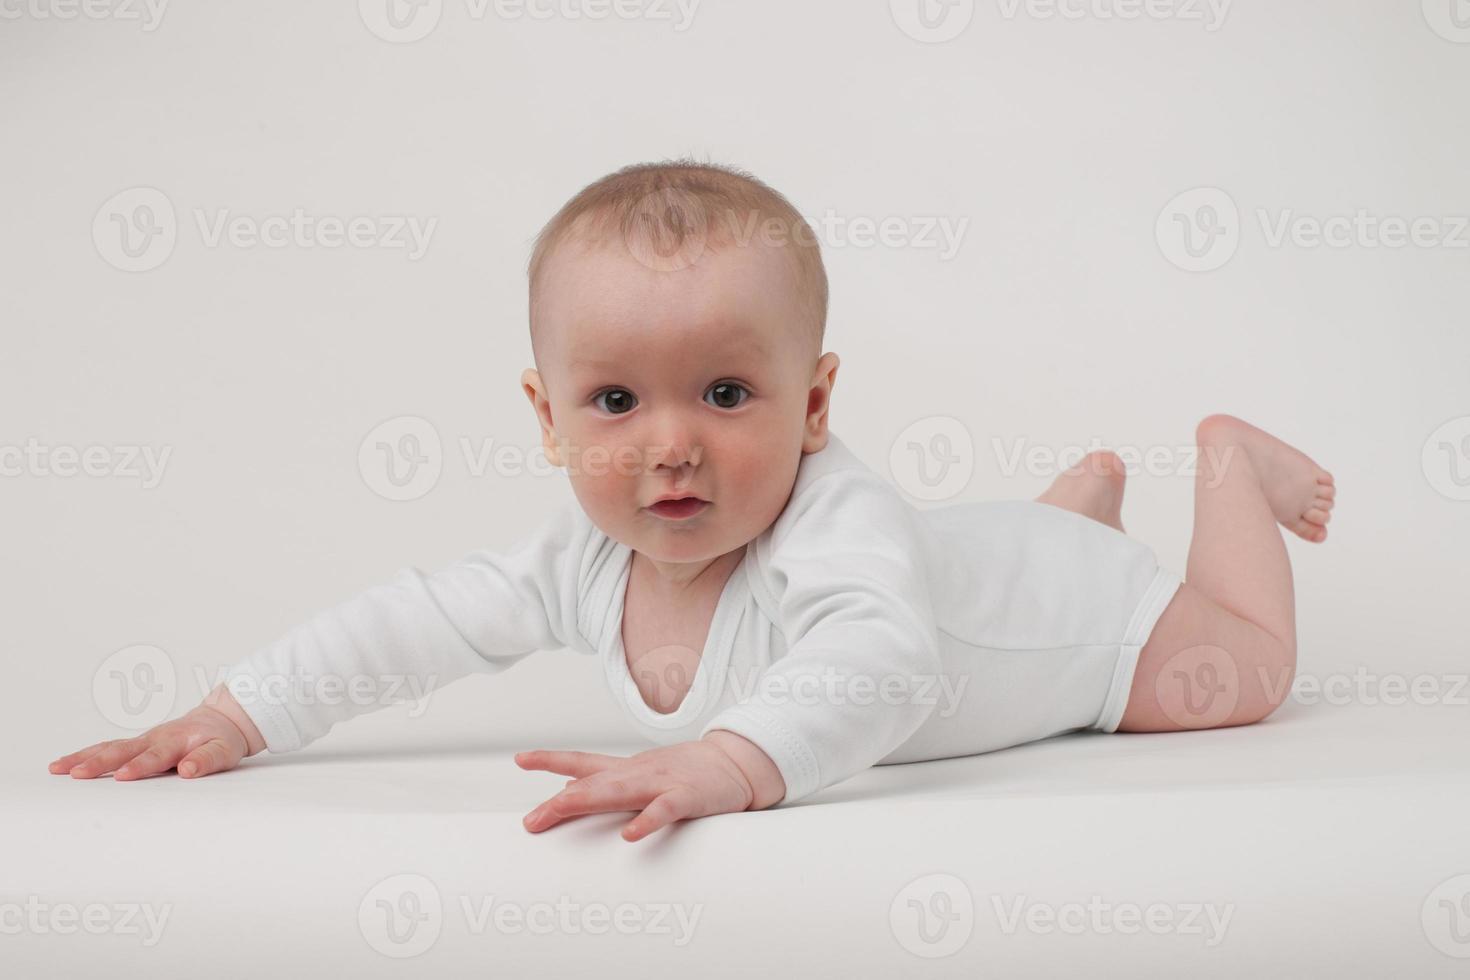 baby on a white background photo